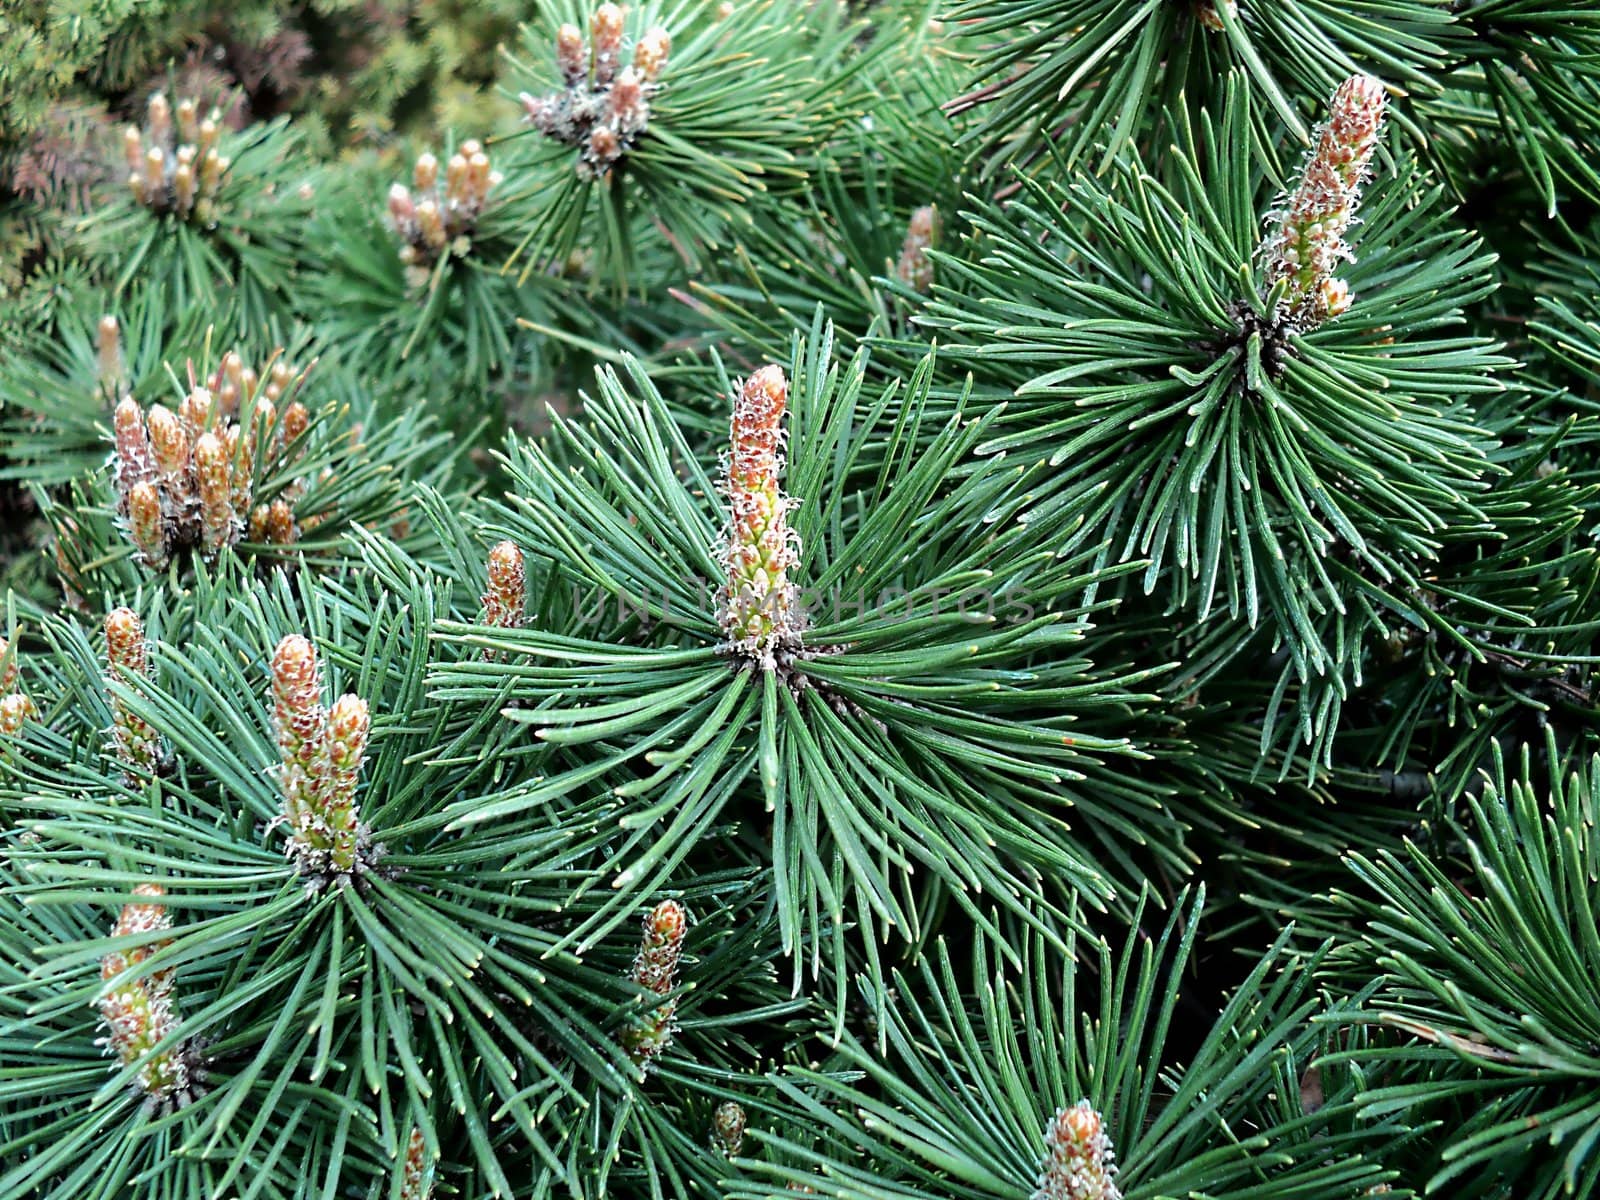 General view of the flowers of coniferous tree